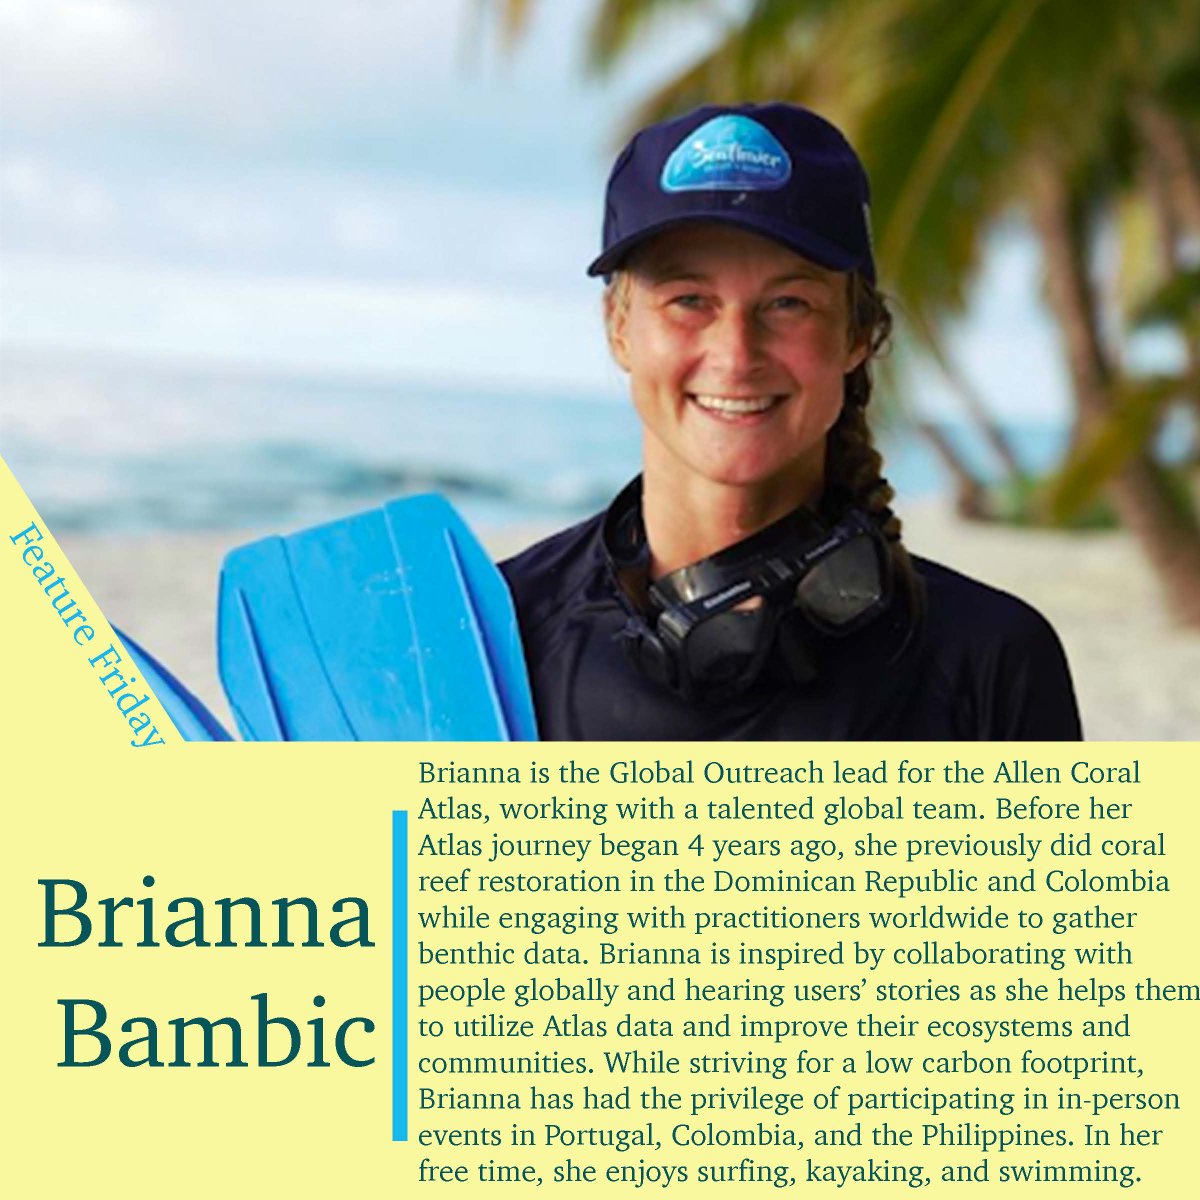 #featurefriday with Brianna Bambic